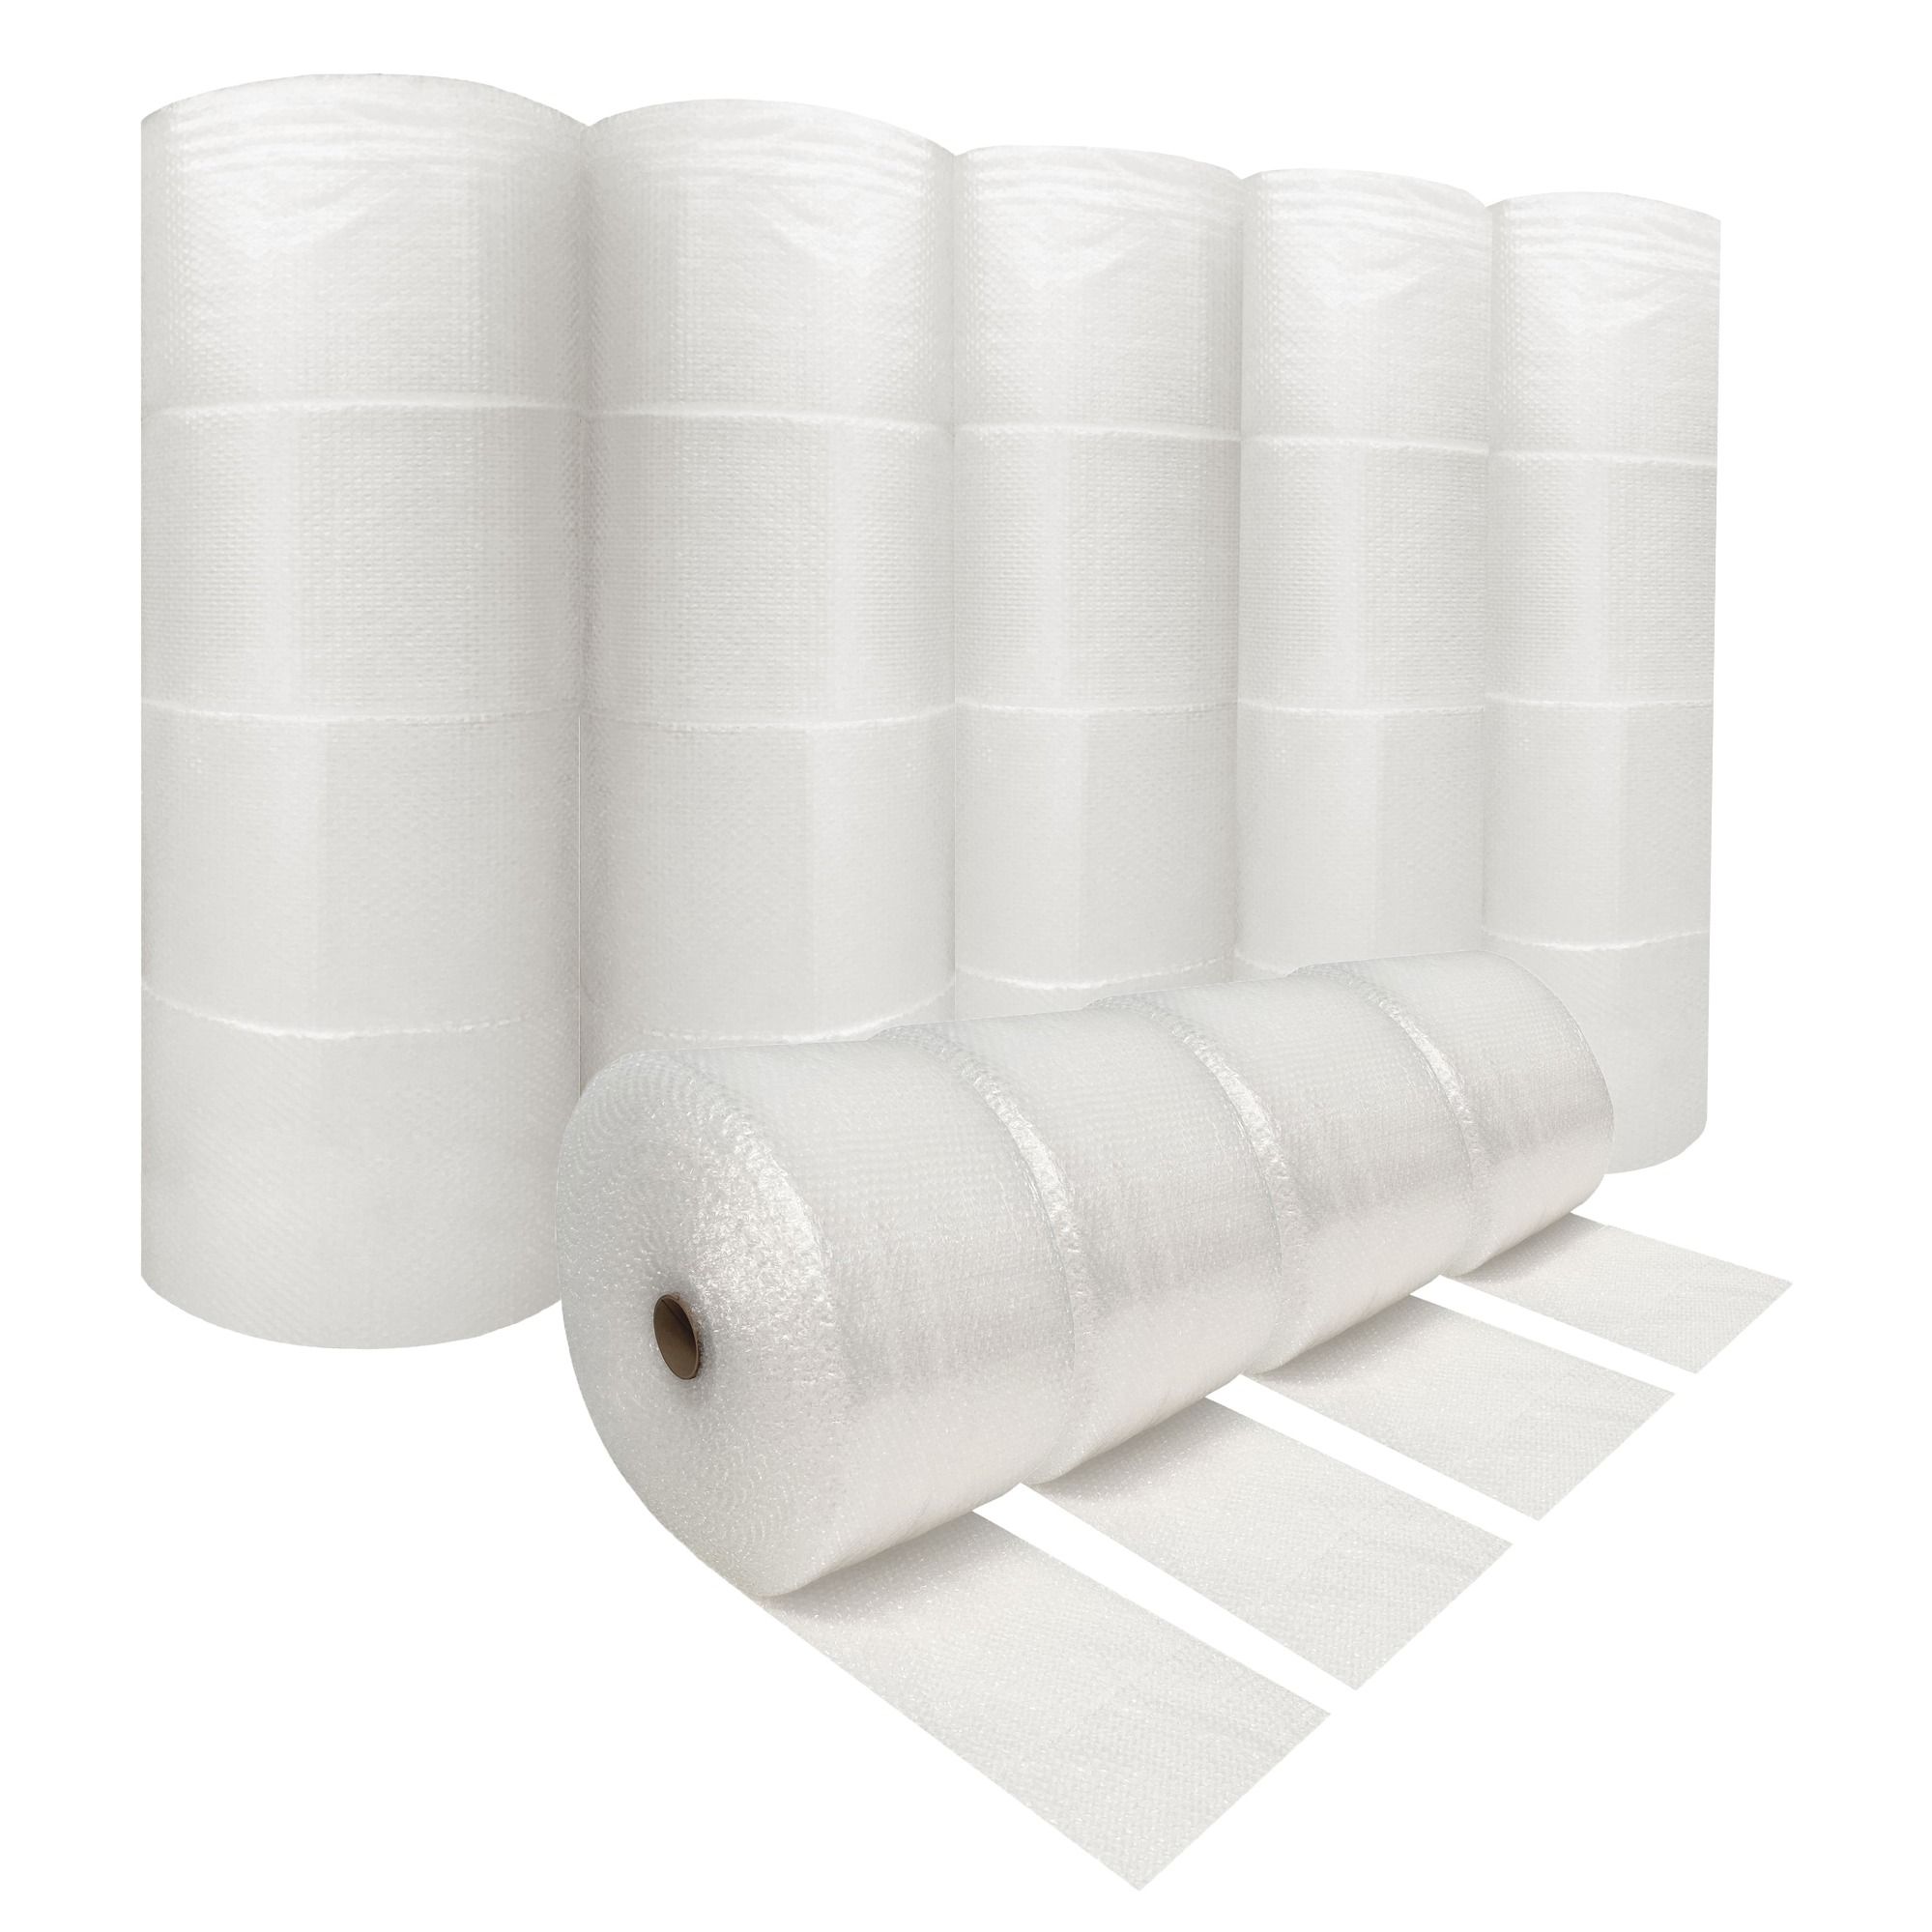 1/16 PE Foam Protective Packaging Wrap 24 x 350' Per Roll - NEW ITEM!! -  Cutting Edge Packaging Products